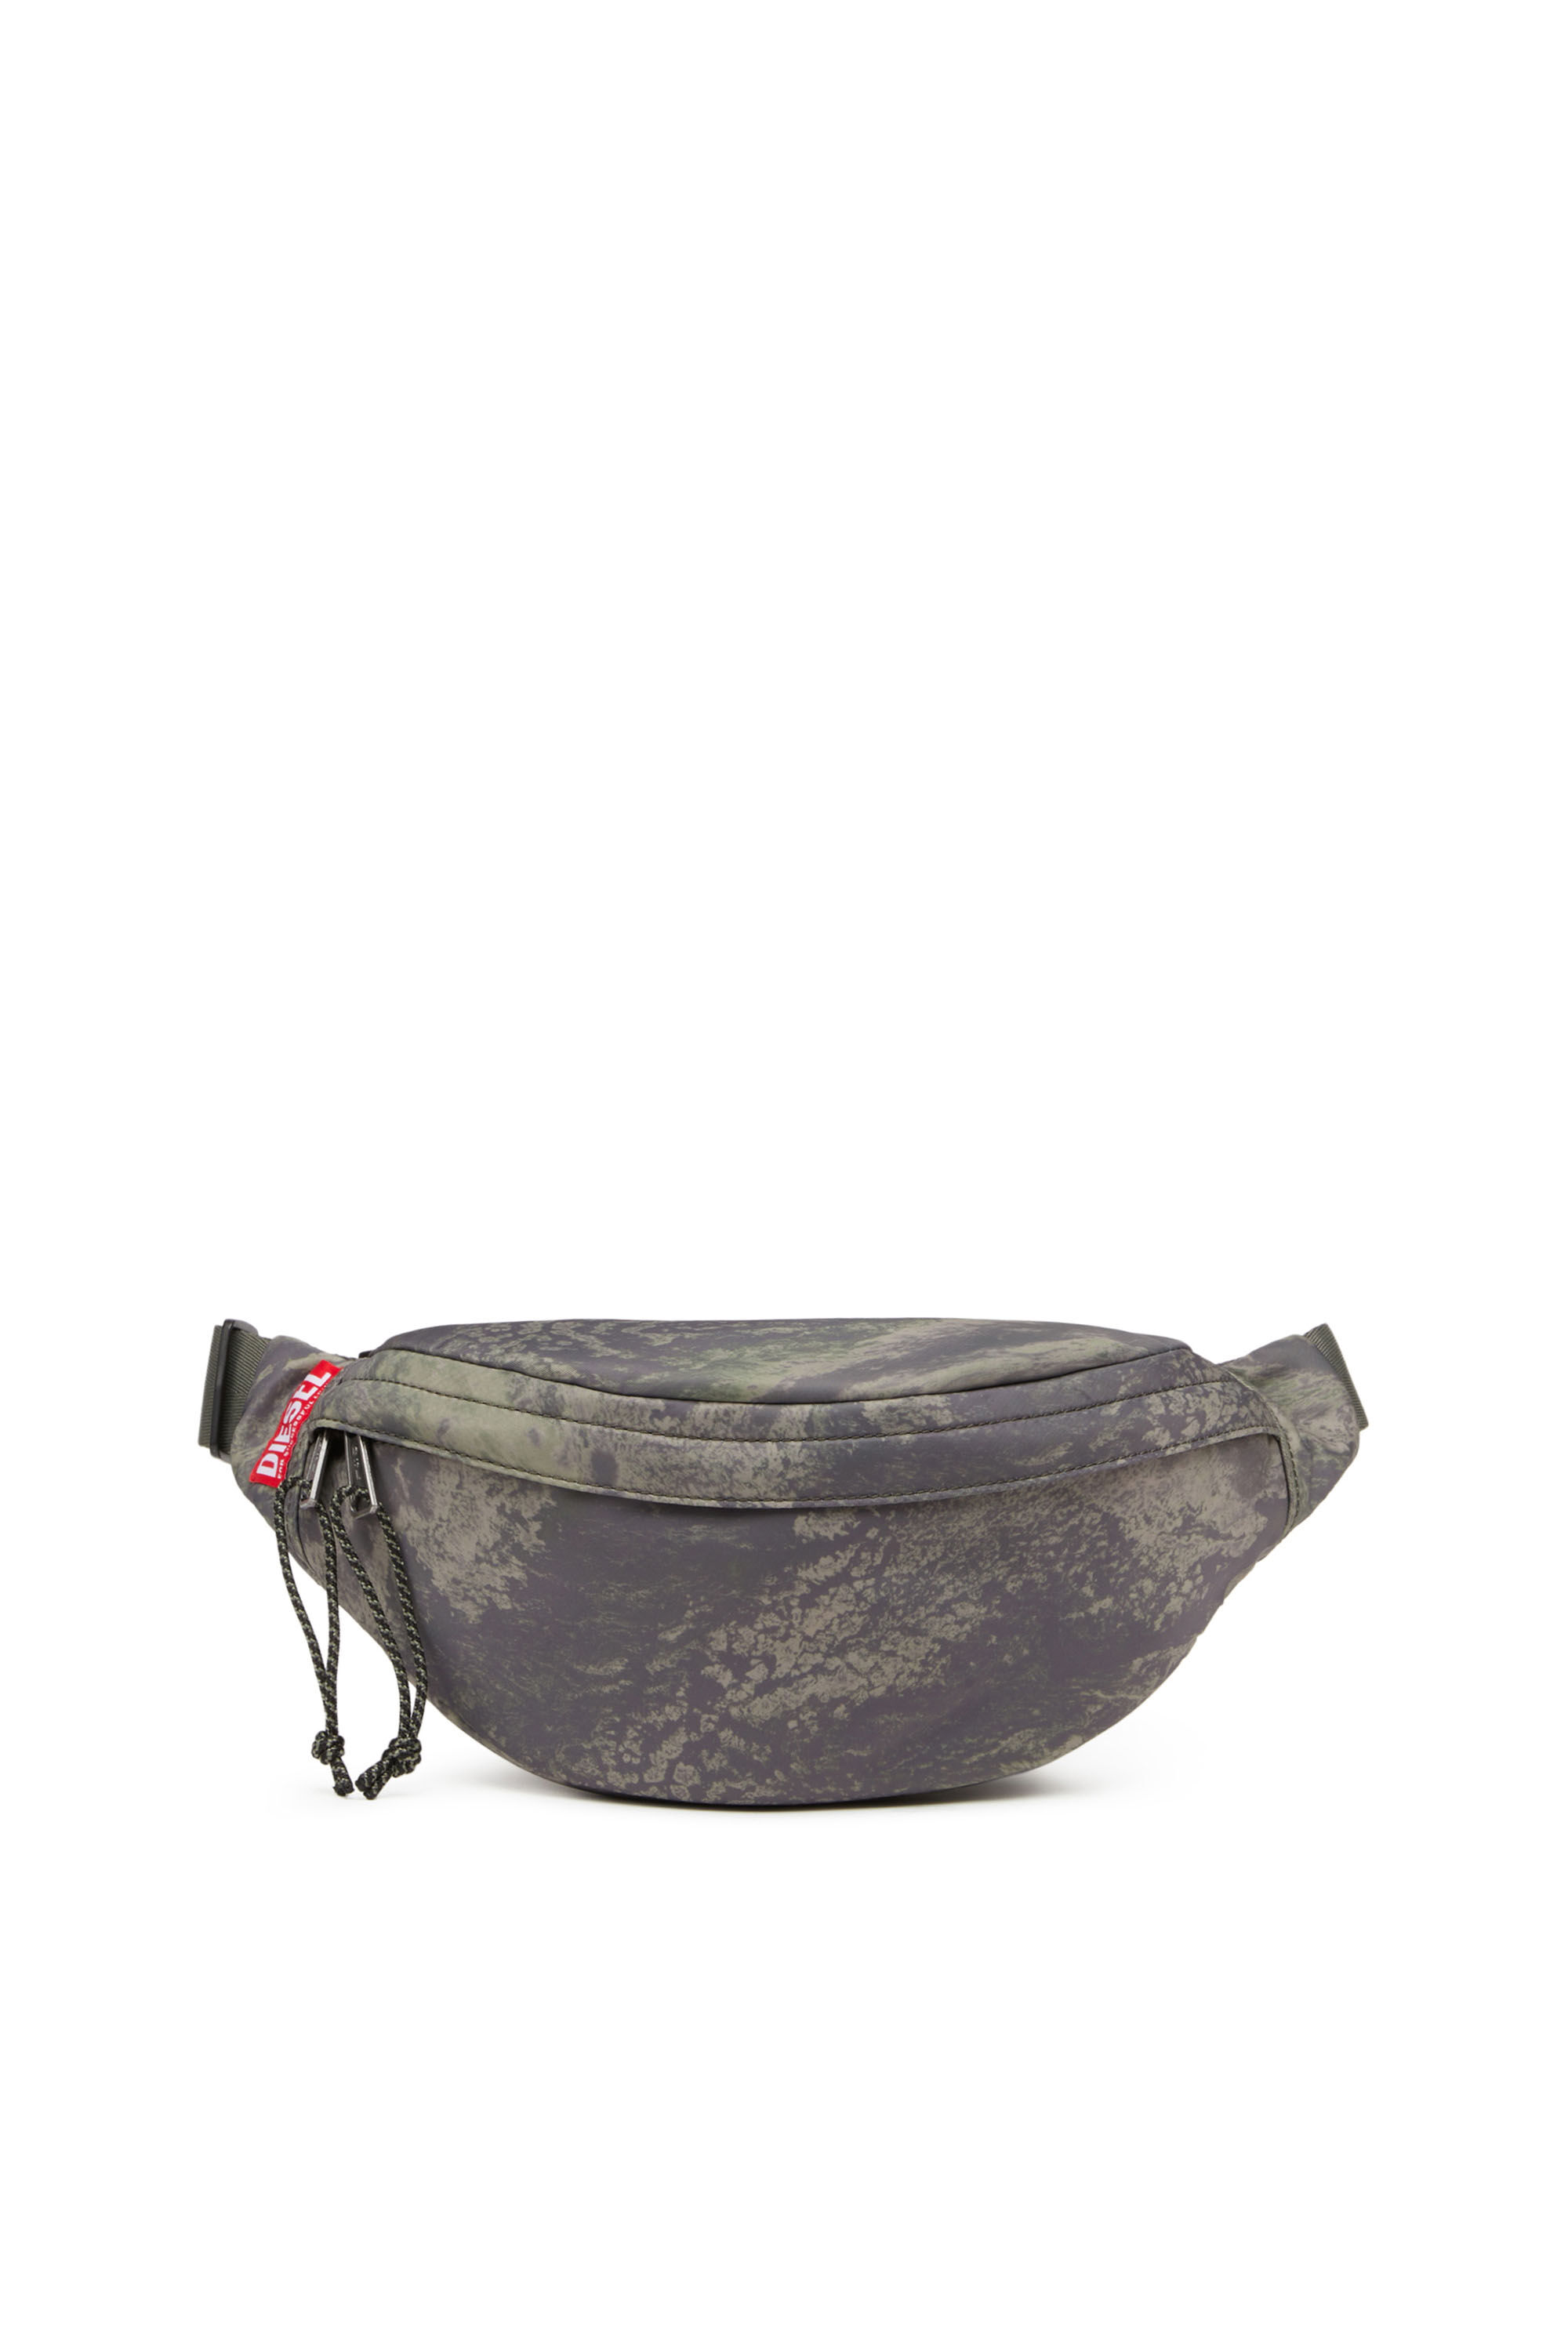 Supreme Fanny Pack Green Camo Print Japan Sling Pouch